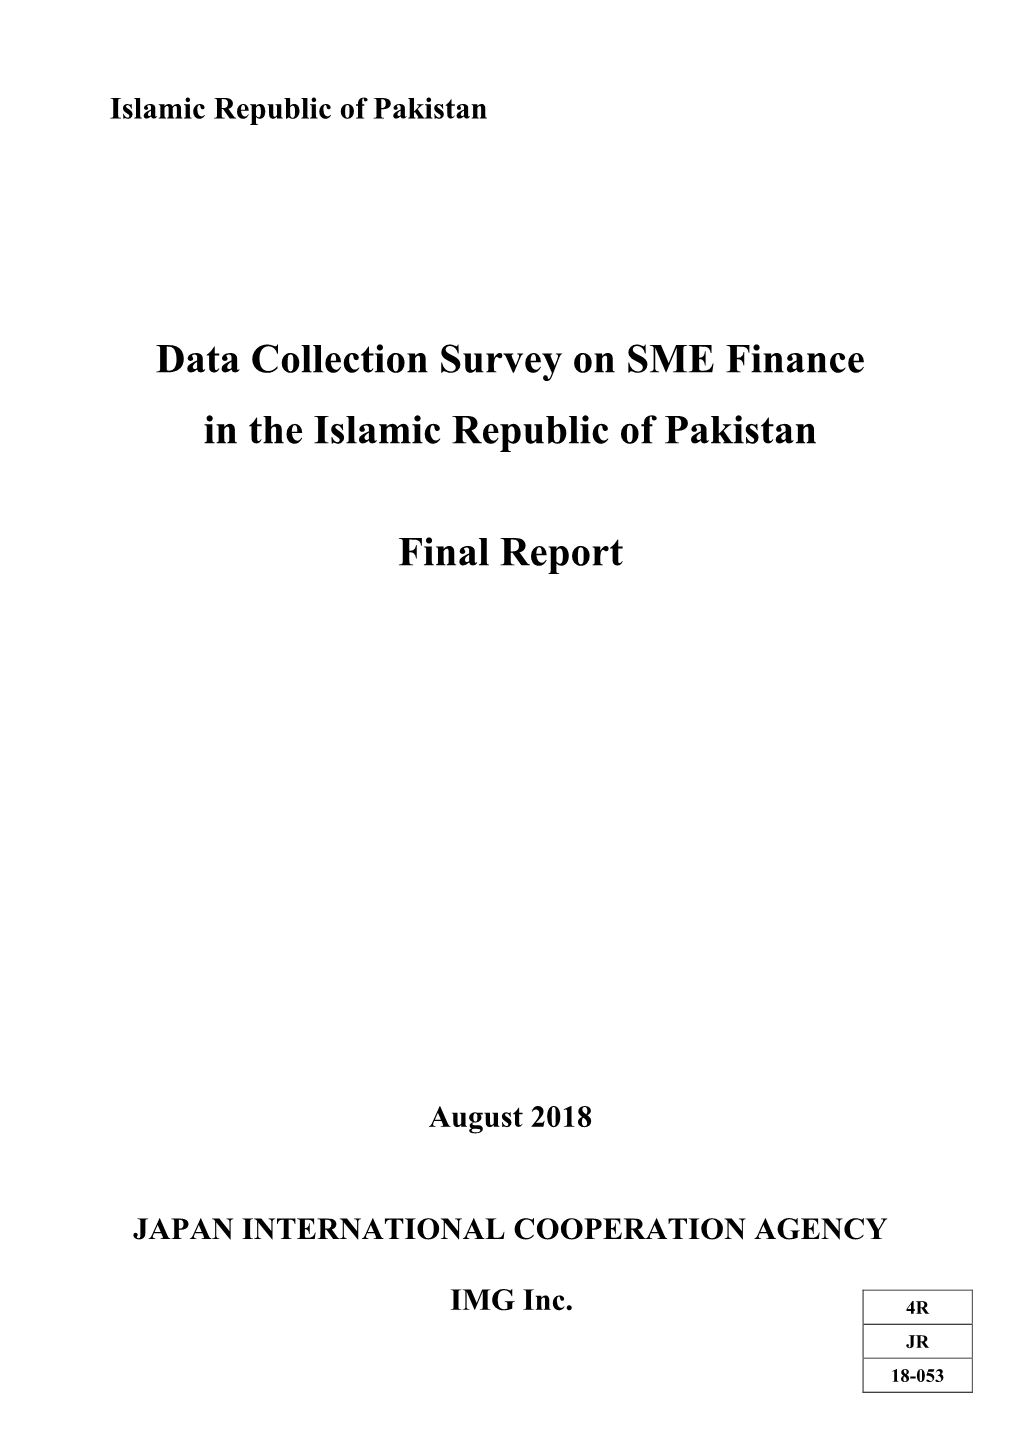 Data Collection Survey on SME Finance in the Islamic Republic of Pakistan